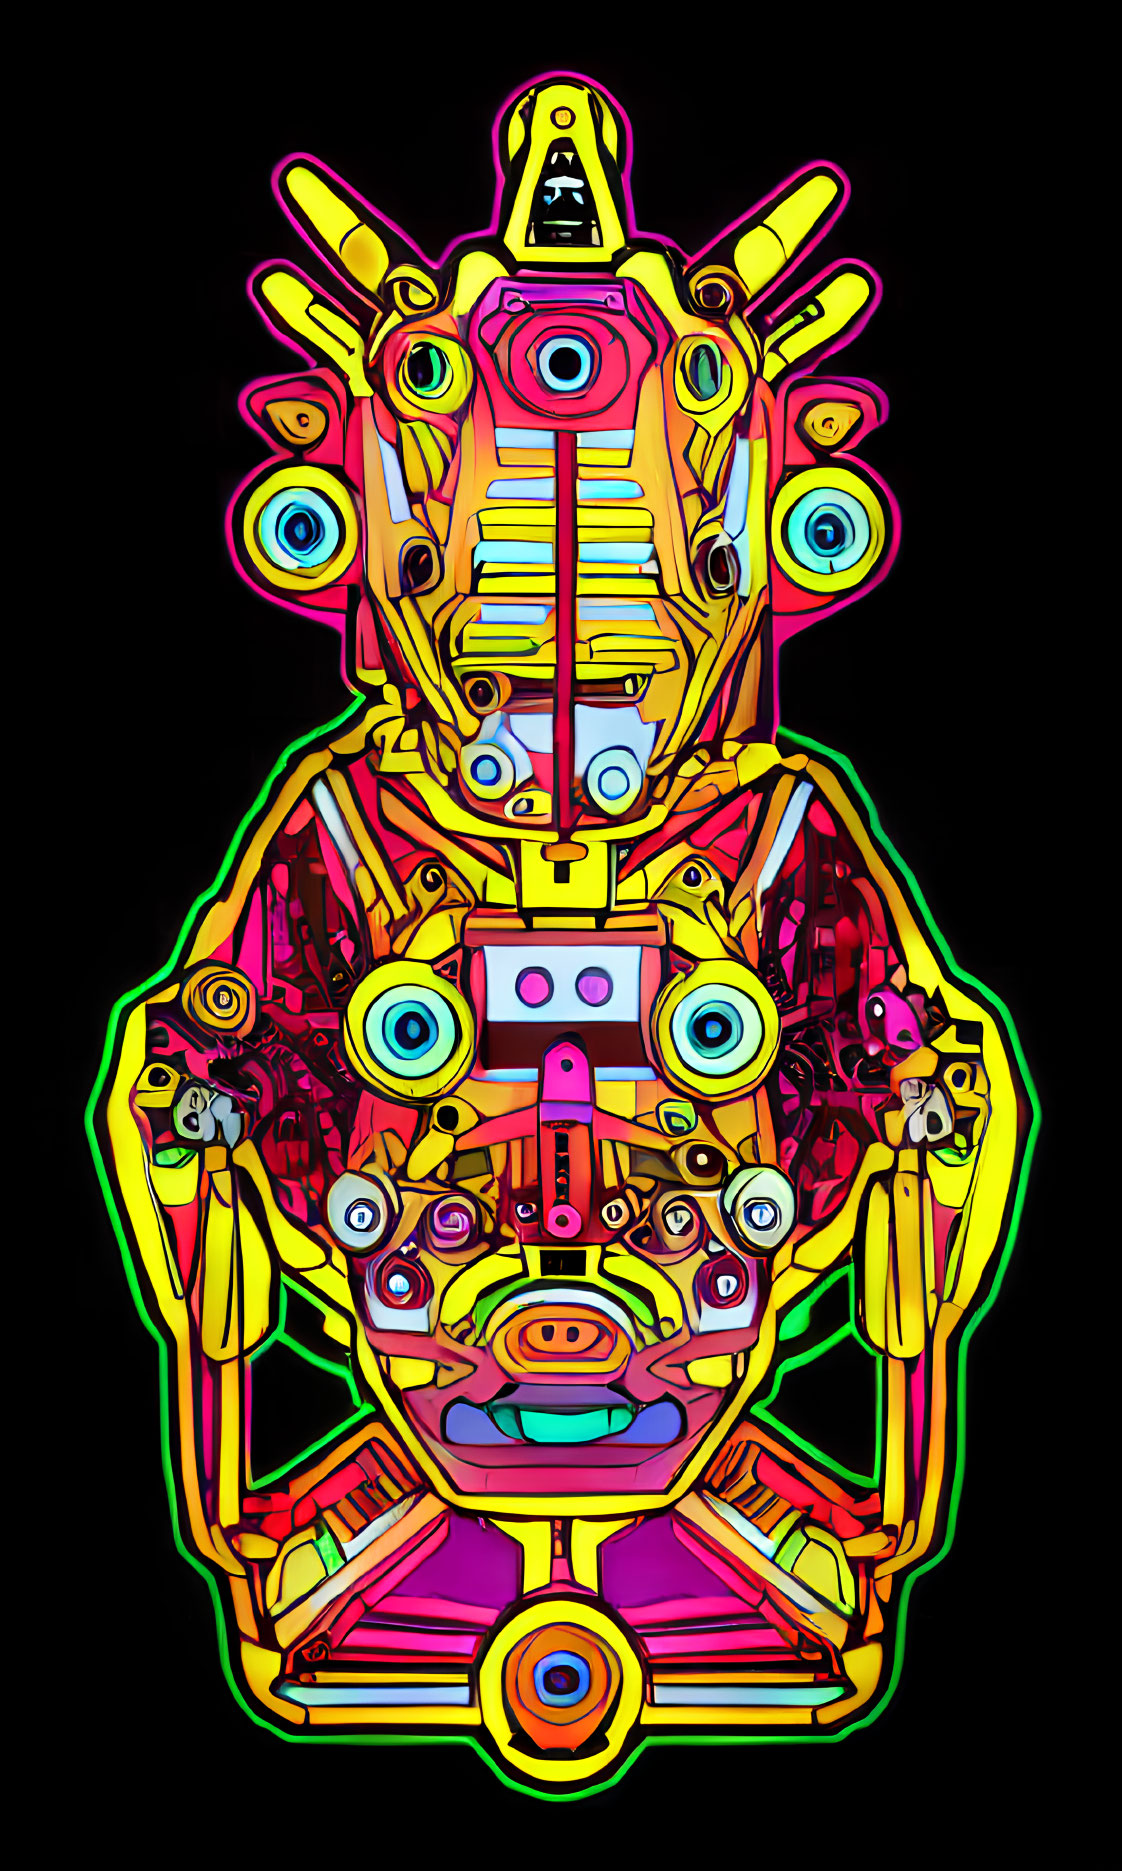 Multicolored robot illustration with intricate design on black background